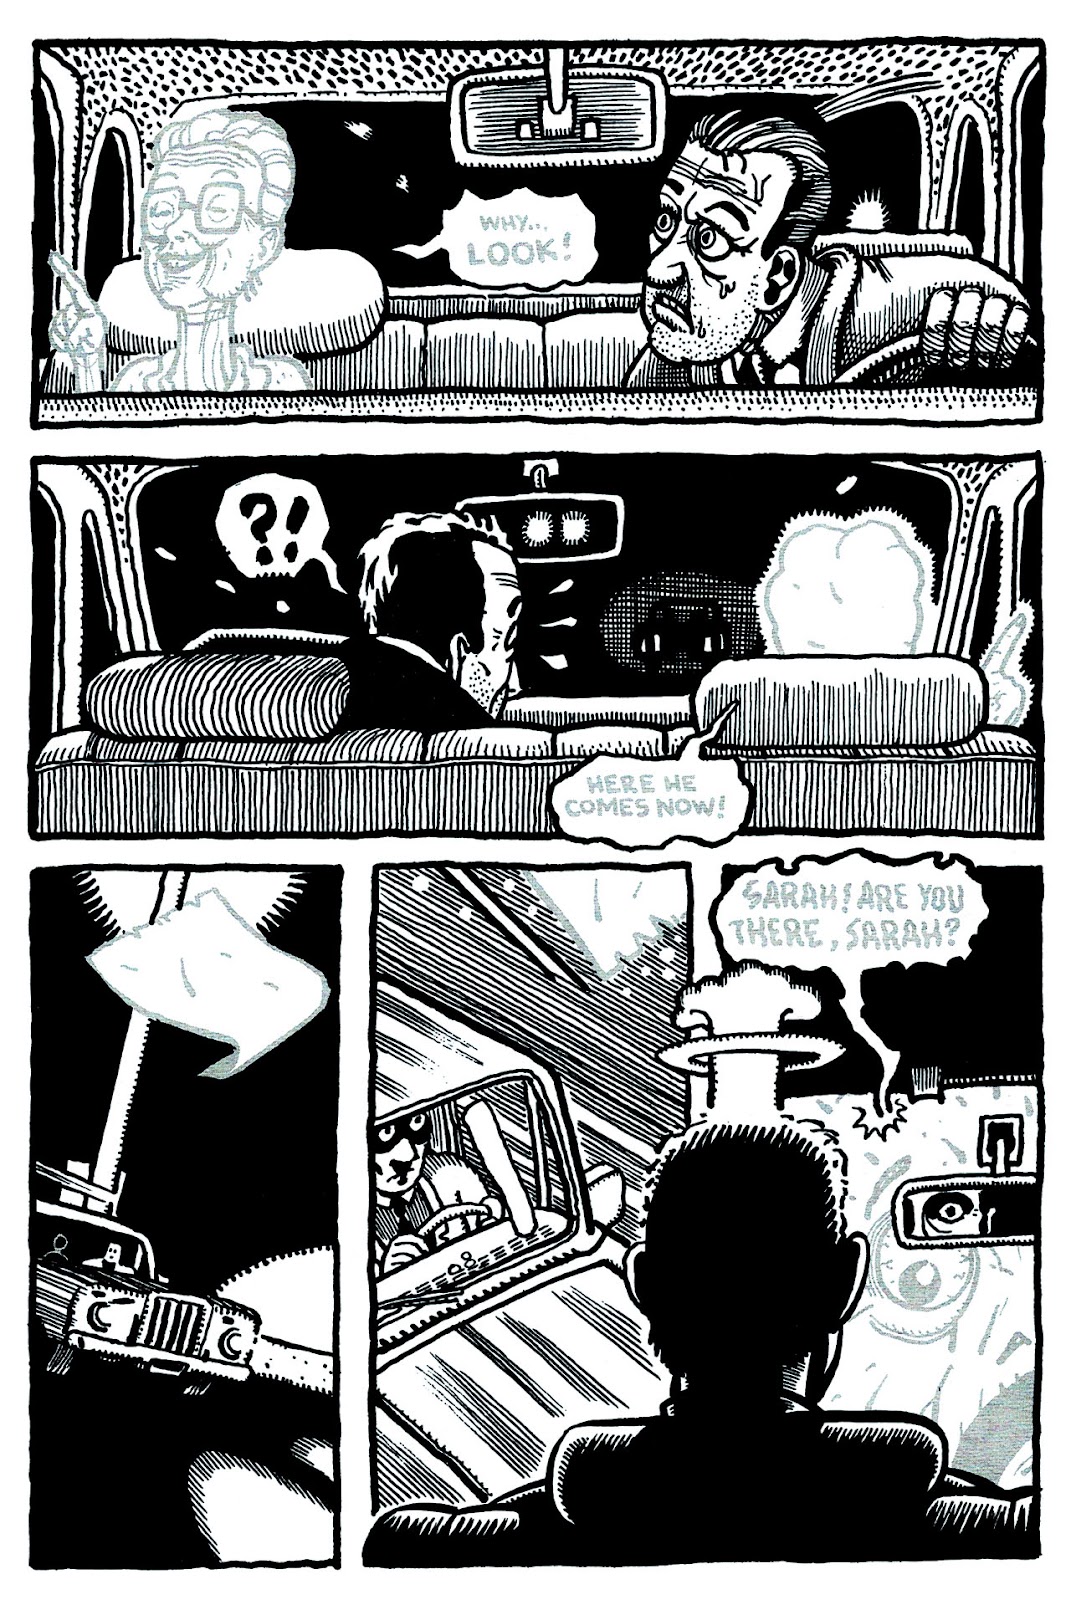 Mr. Monster Presents: (crack-a-boom) issue 3 - Page 14